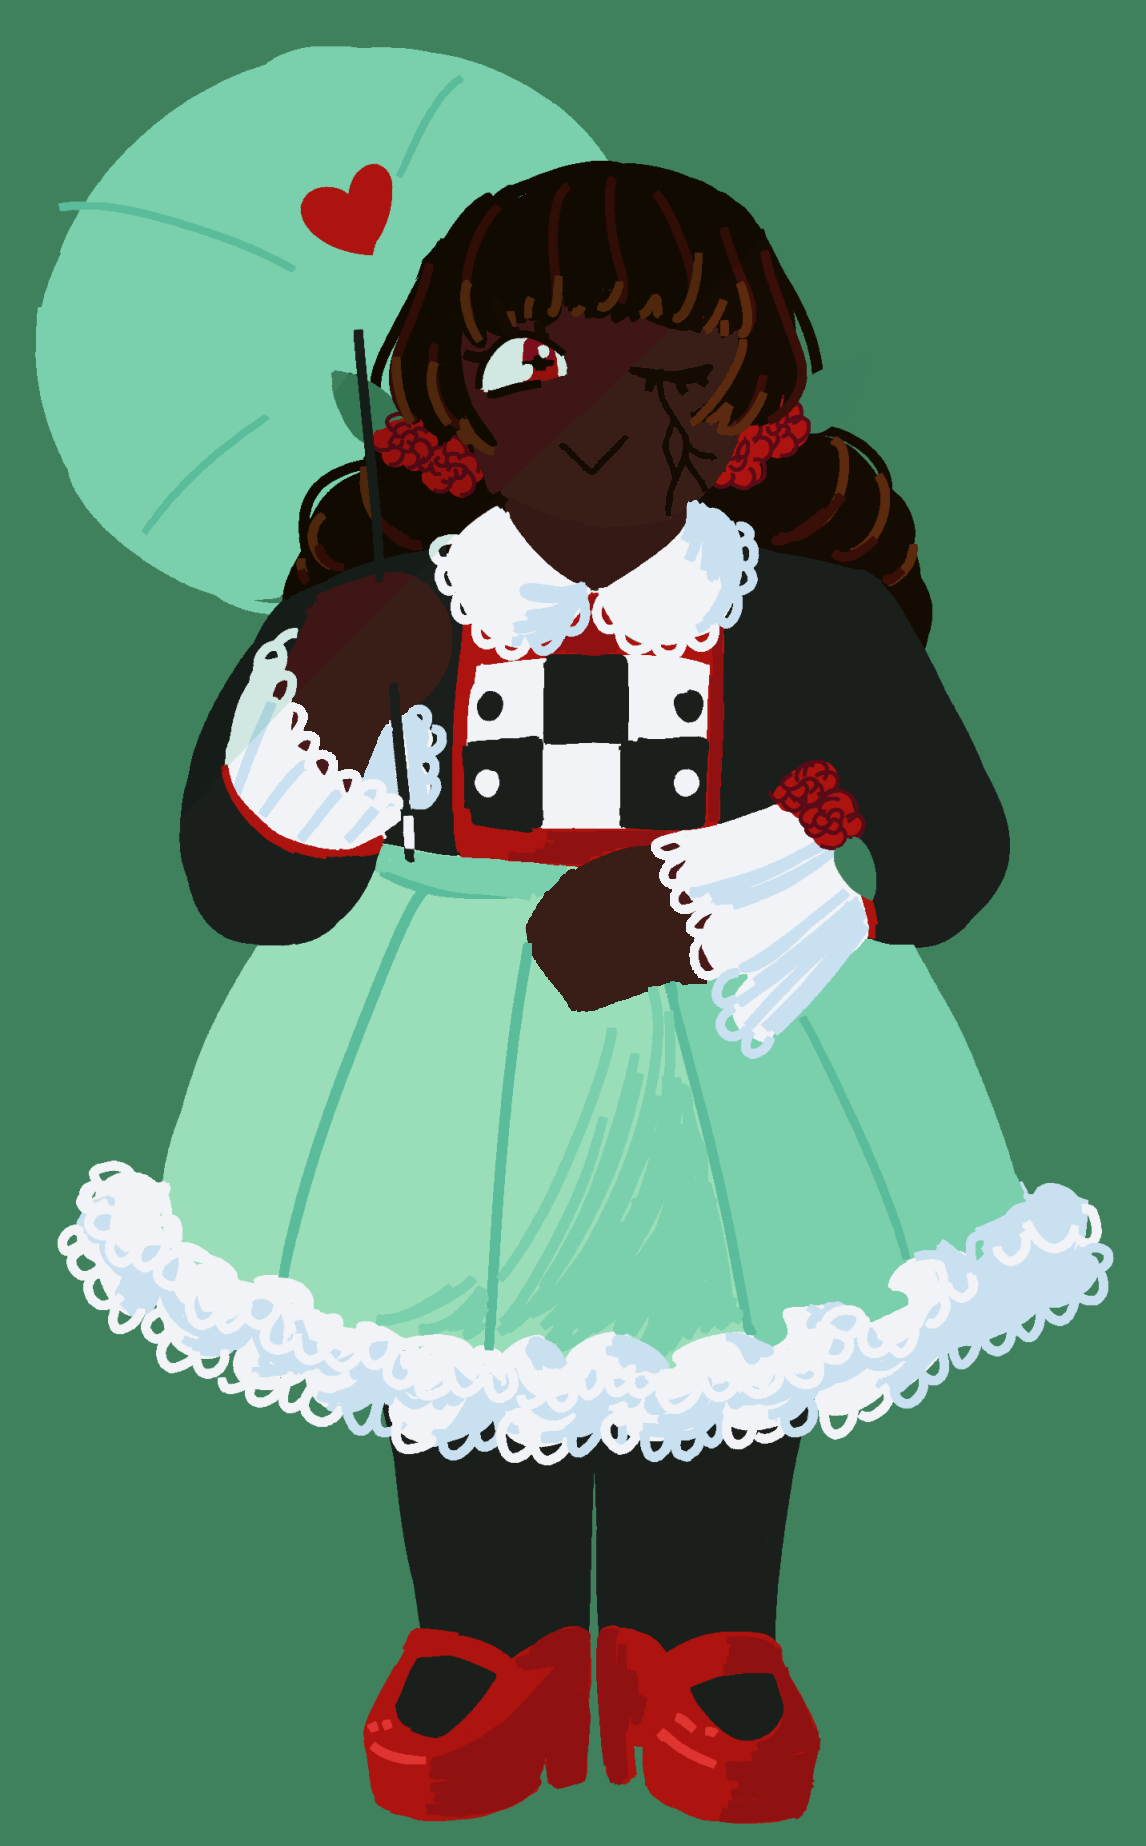 Adeola in an outfit that resembles Madotsuki's from Yume Nikki. The differences being the lace details and the colors that use Adeola's outfit palette. She's holding her parasol and winking.